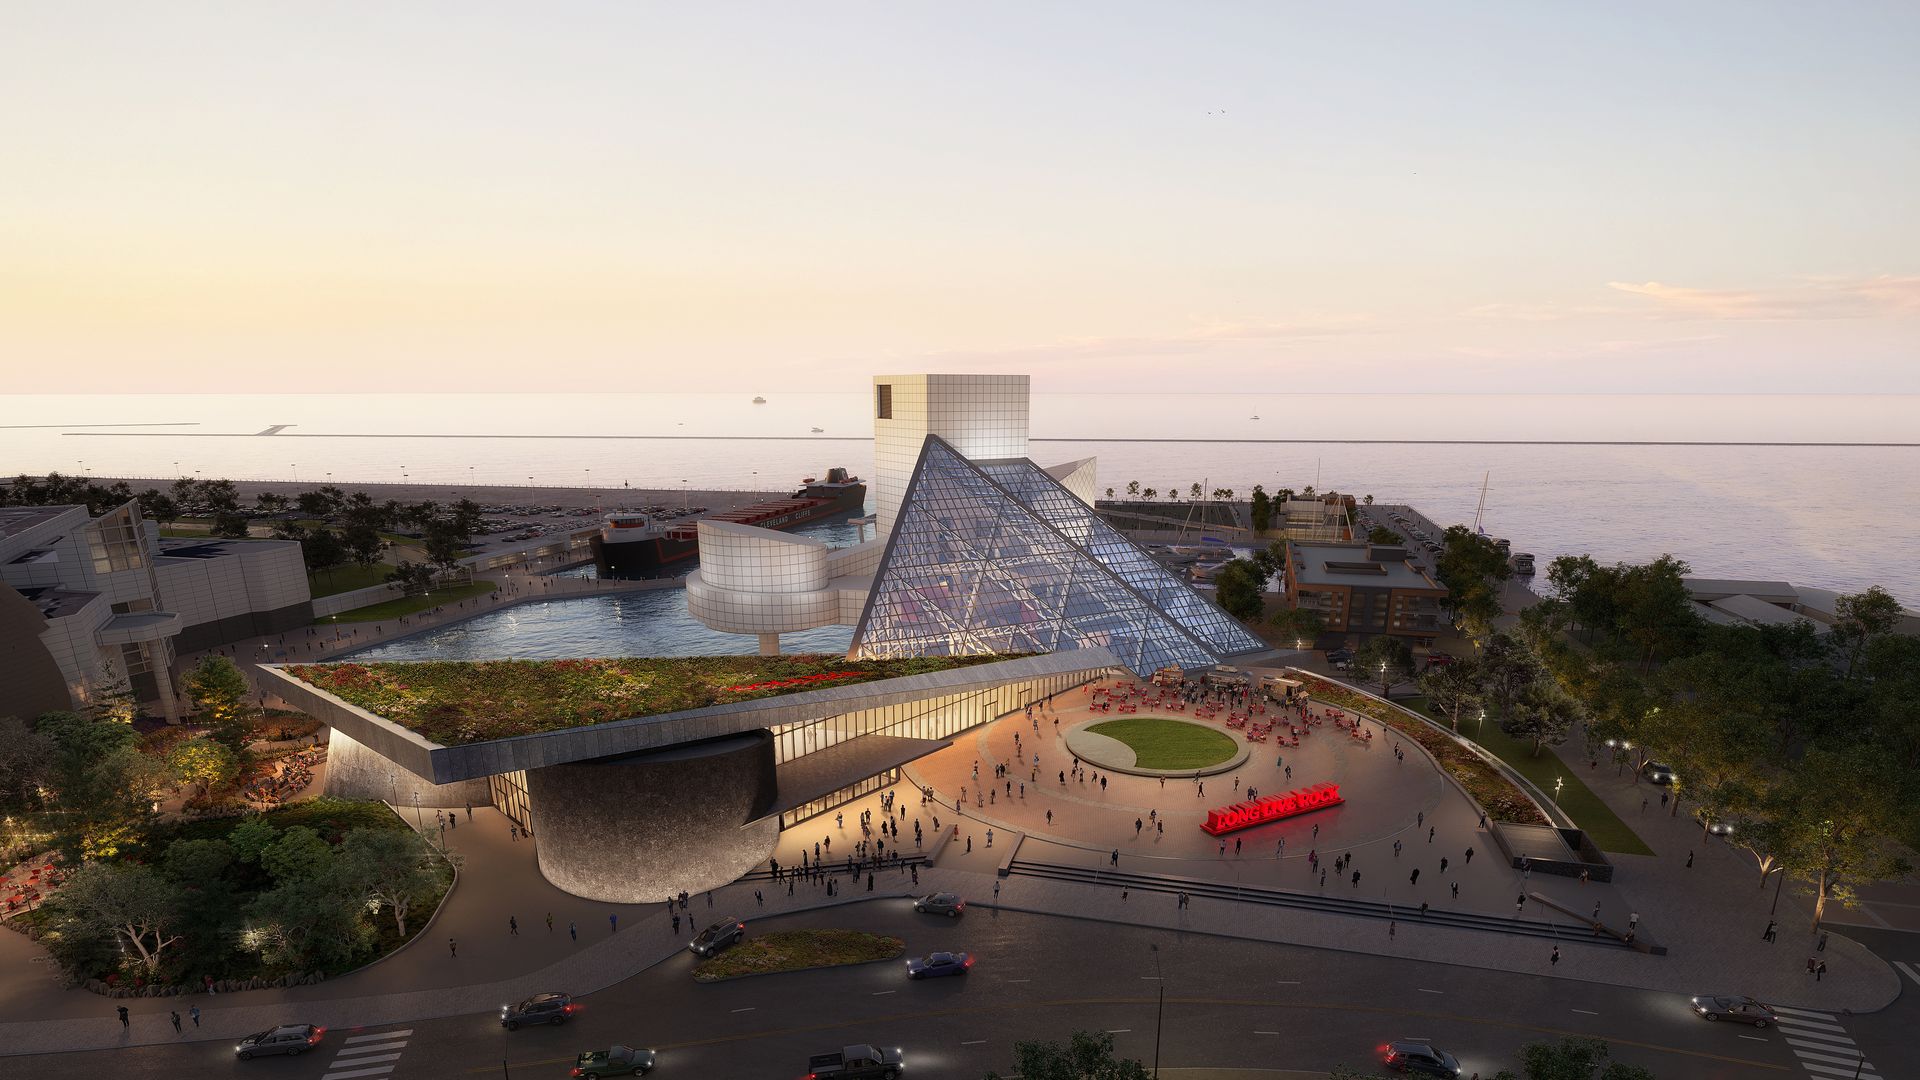 A architectural design of the Rock & Roll Hall of Fame's expansion.